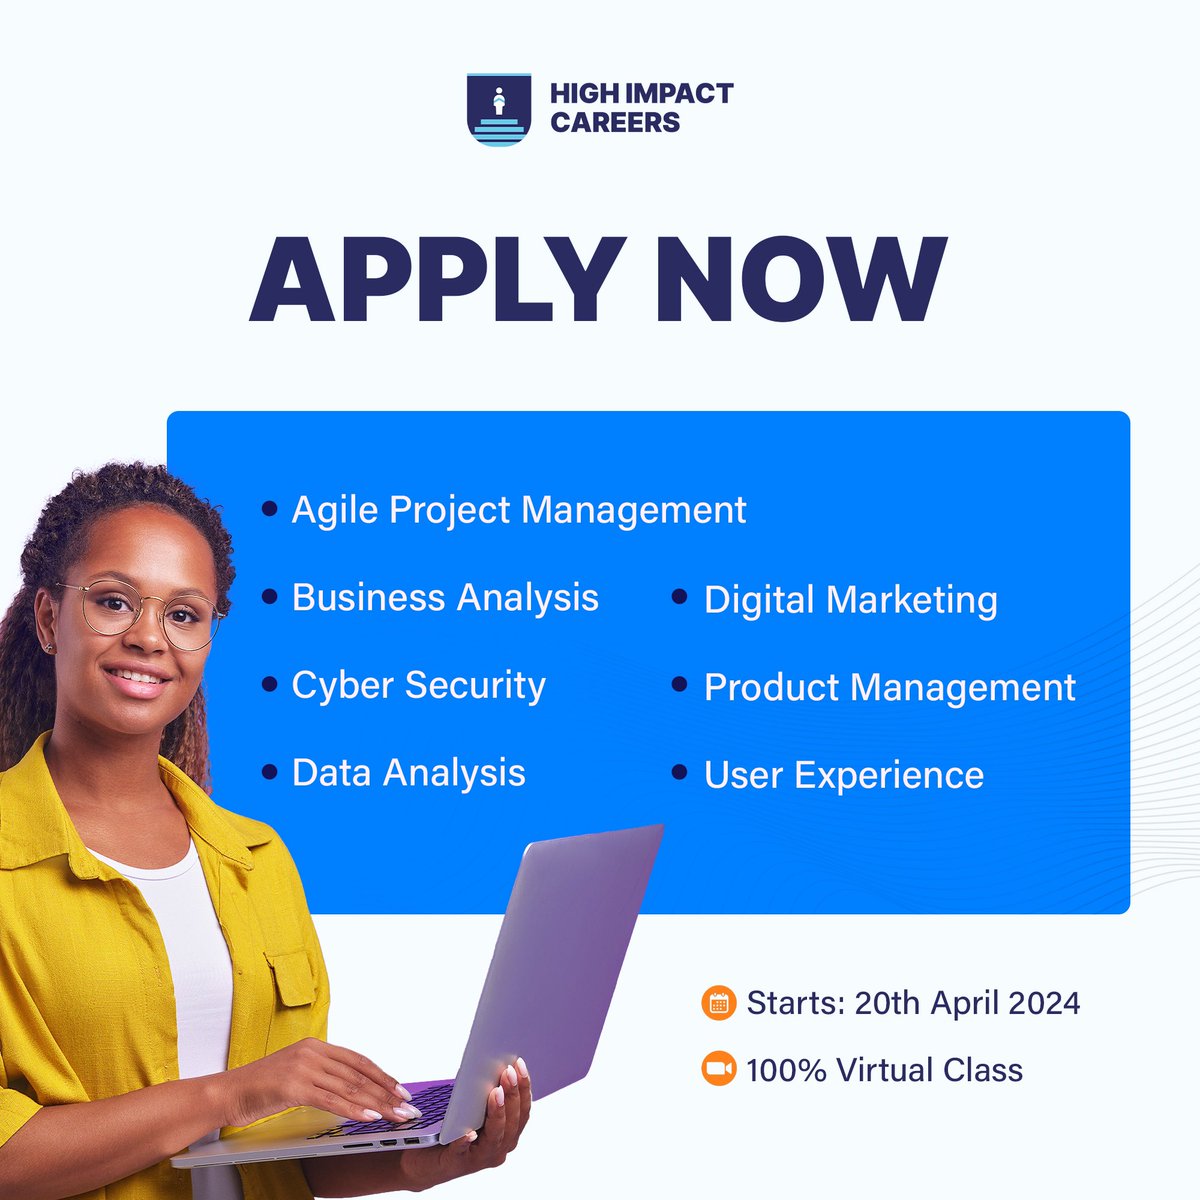 Join @HighImpact01’s Bootcamp in April 2024, Take One Of These Courses & Switch Into a Tech or a Non Tech Role: •Agile Project Management •Business Analysis •Cyber Security •Data Analysis •Product Management •User Experience Enrol via highimpactcareers.co.uk/bootcamp/.